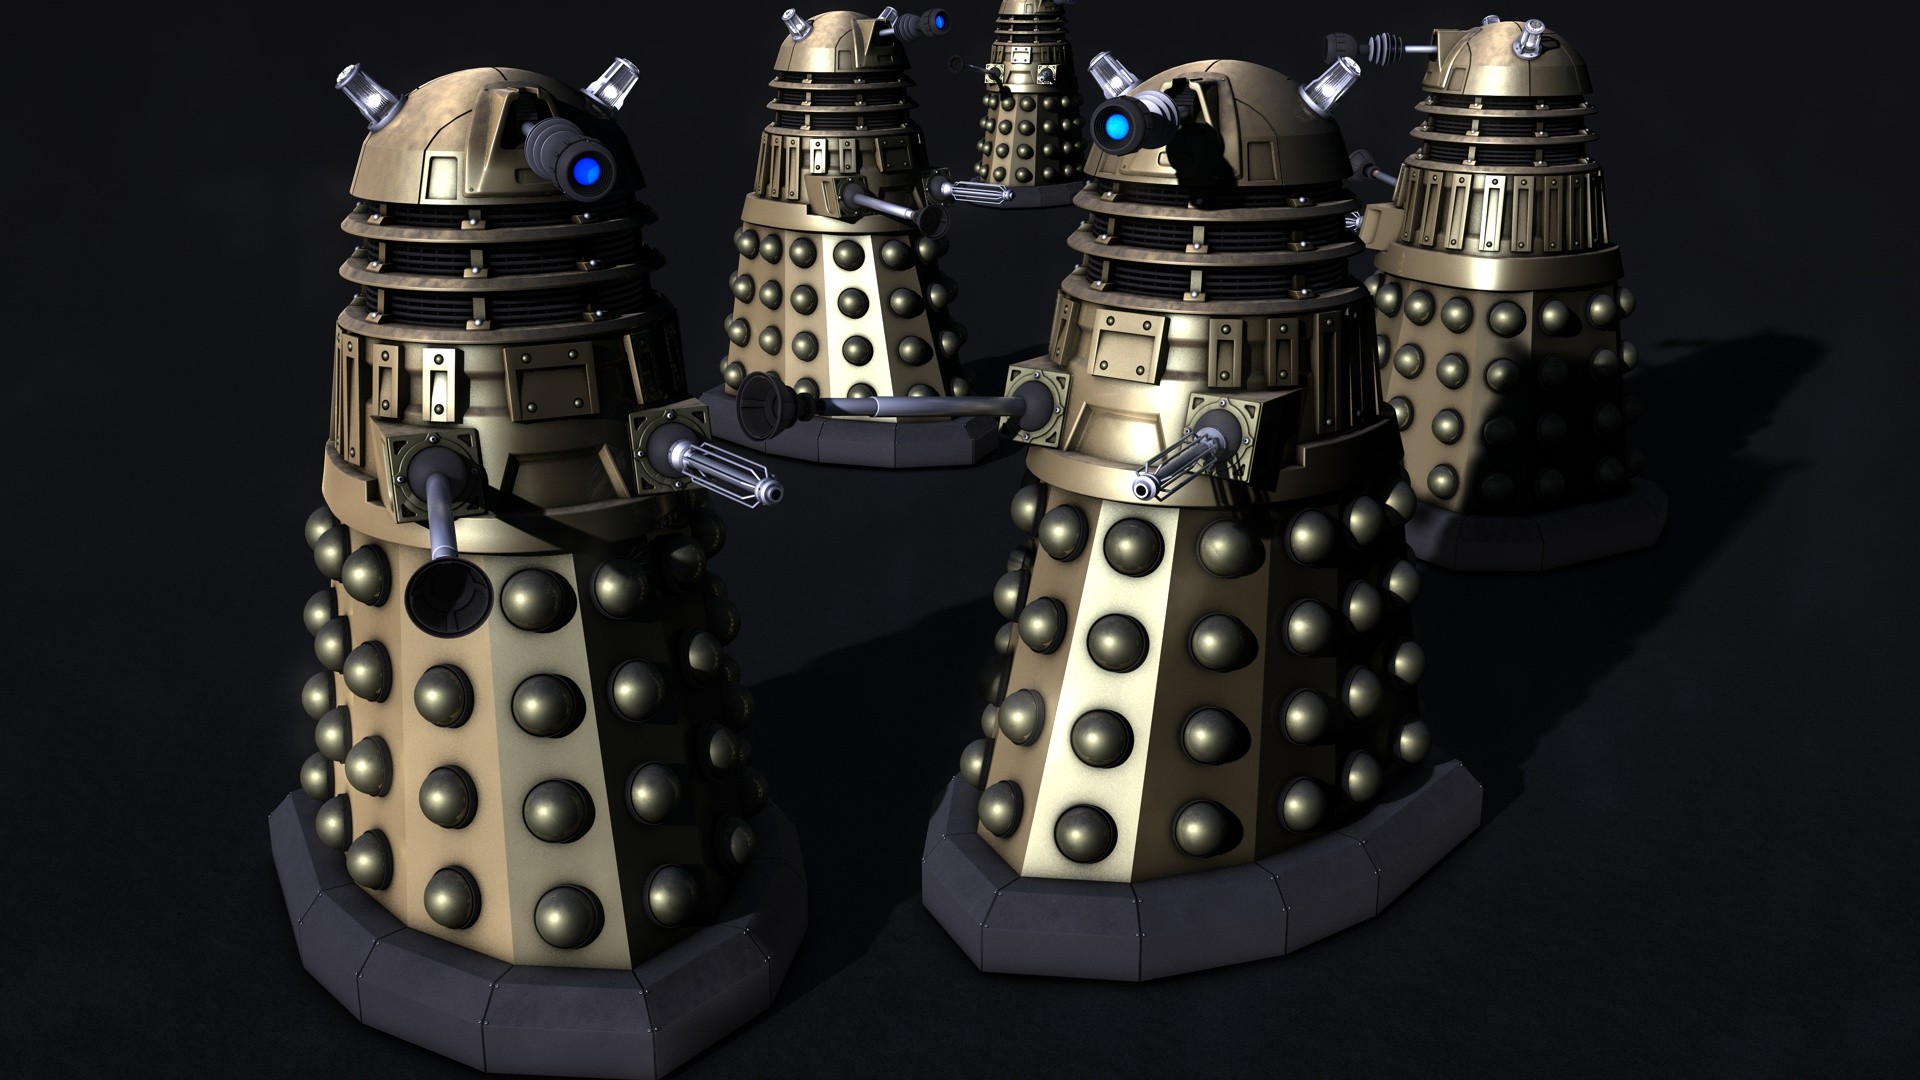 General 1920x1080 Doctor Who Daleks TV series